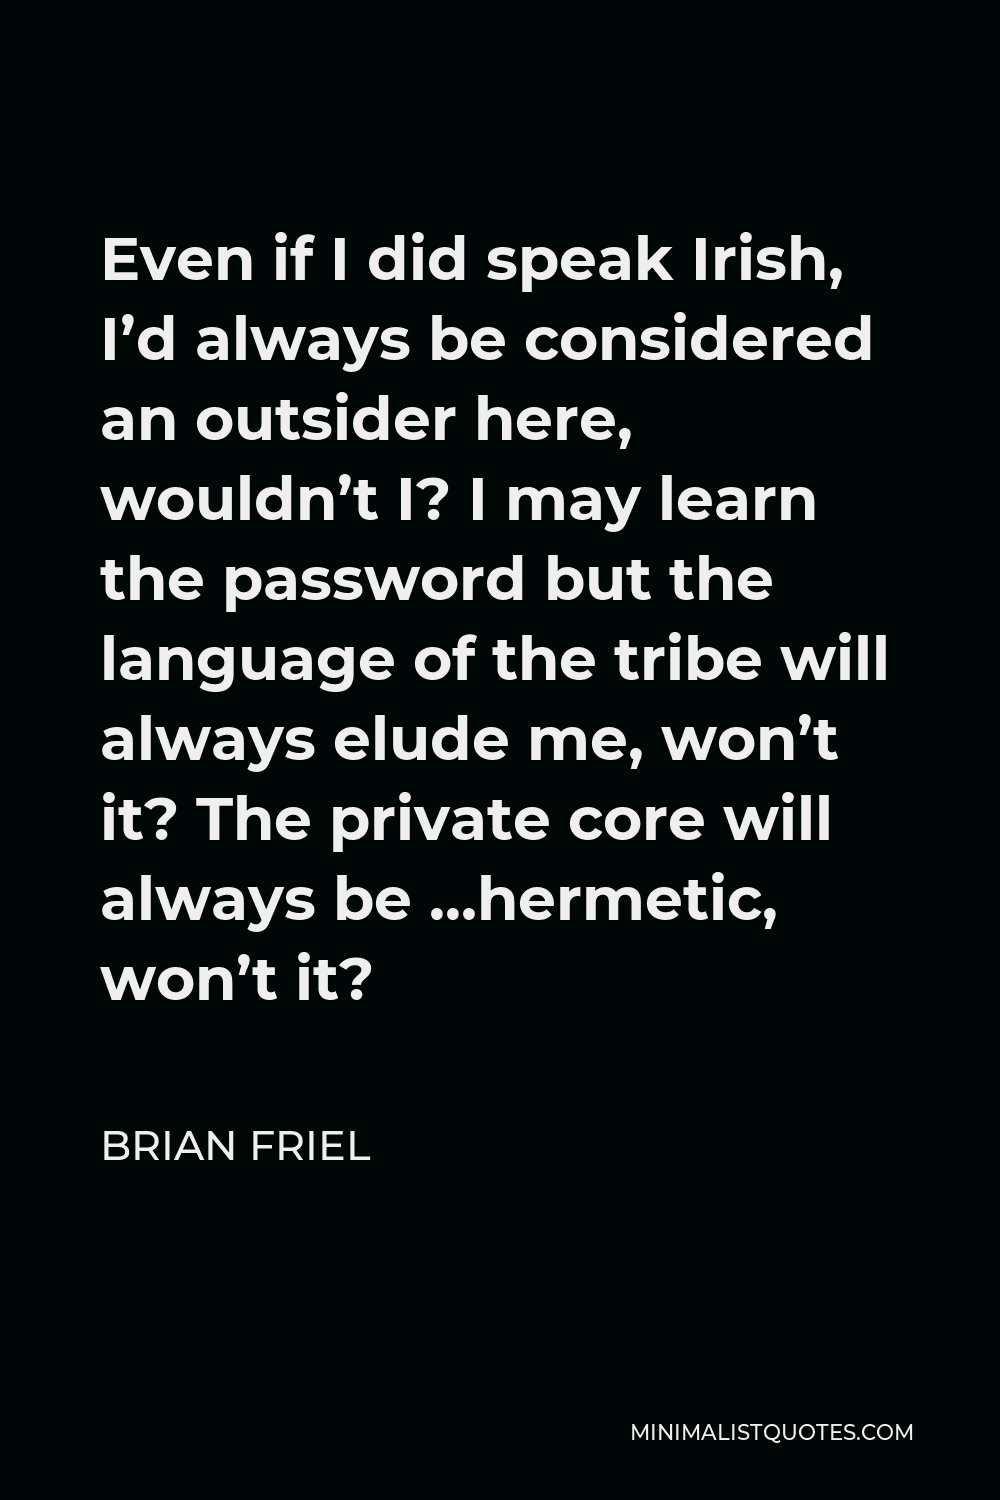 Brian Friel Quote - Even if I did speak Irish, I’d always be considered an outsider here, wouldn’t I? I may learn the password but the language of the tribe will always elude me, won’t it? The private core will always be …hermetic, won’t it?